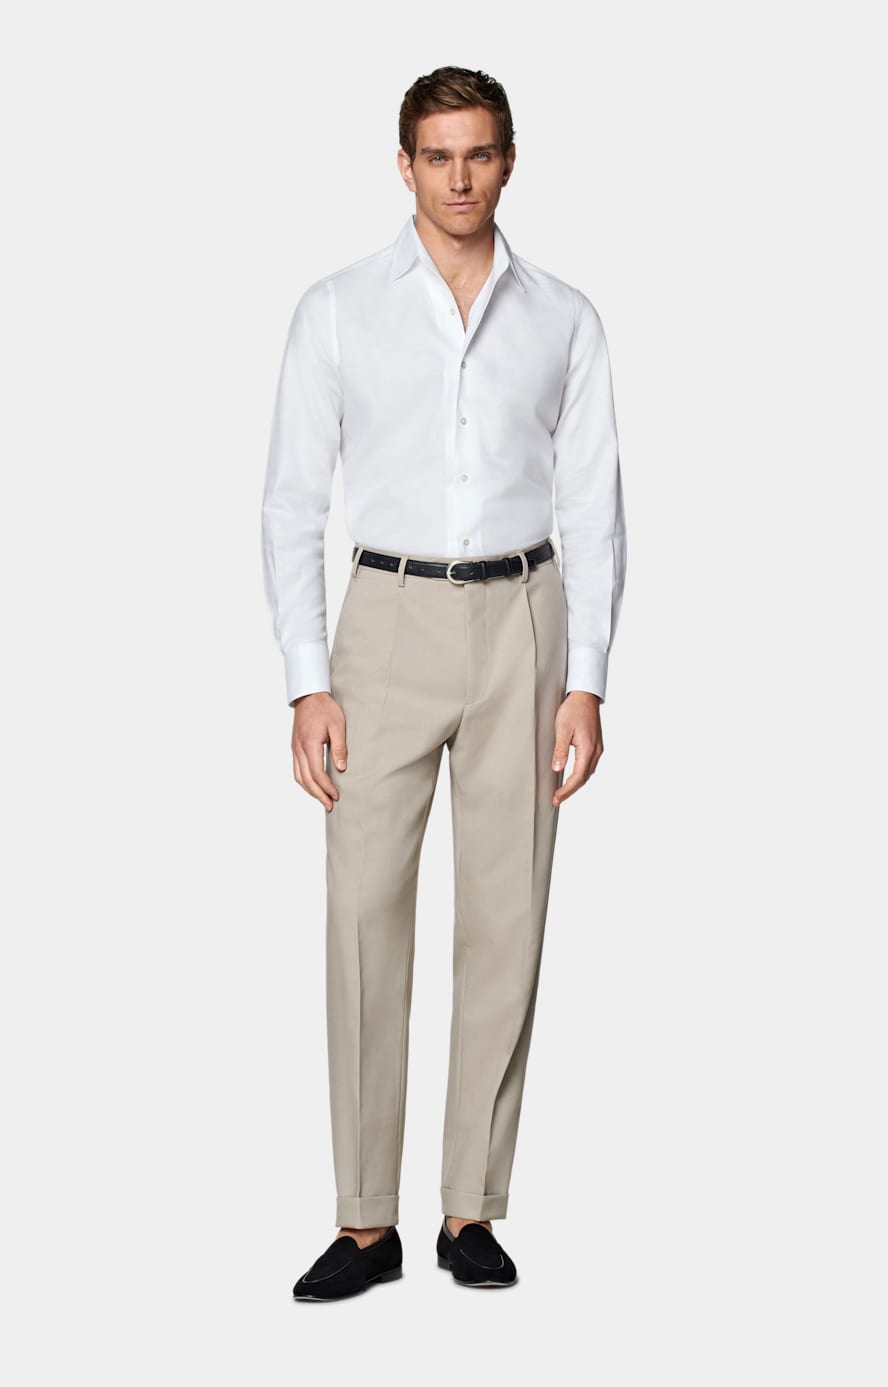 White One Piece Collar Slim Fit Shirt in Cotton Linen | SUITSUPPLY US